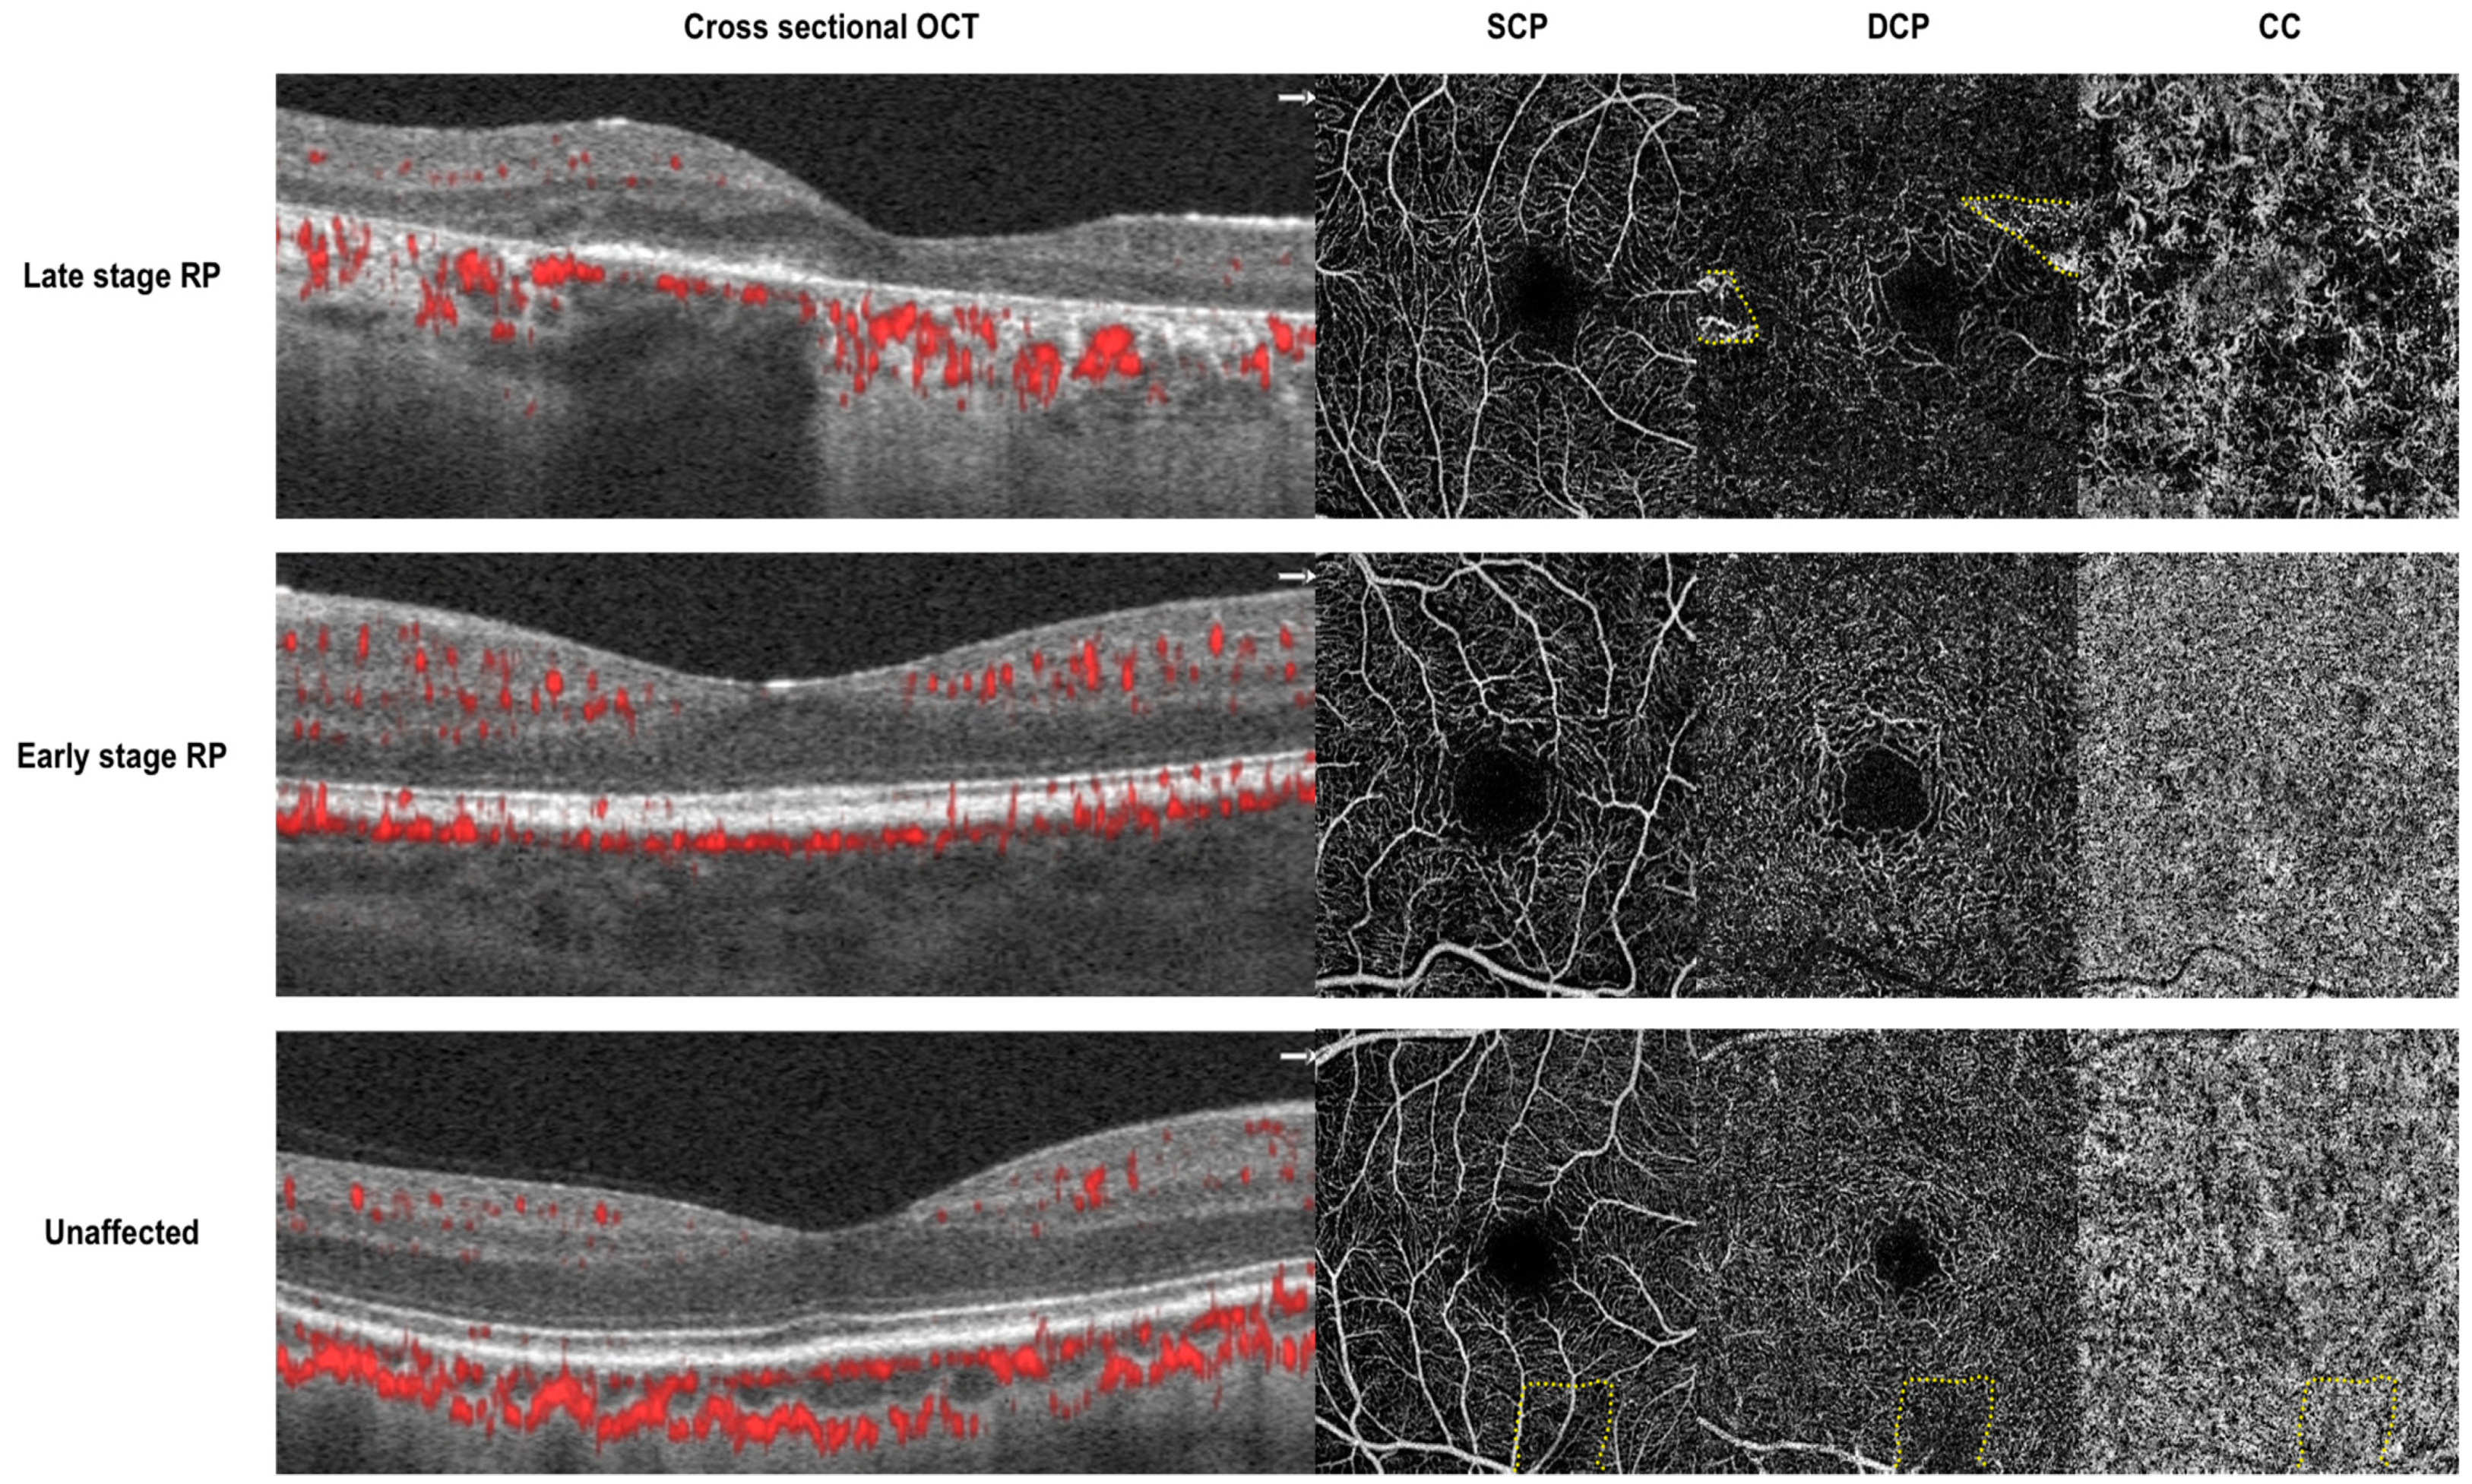 Jcm Free Full Text Optical Coherence Tomography Angiography Imaging In Inherited Retinal Diseases Html